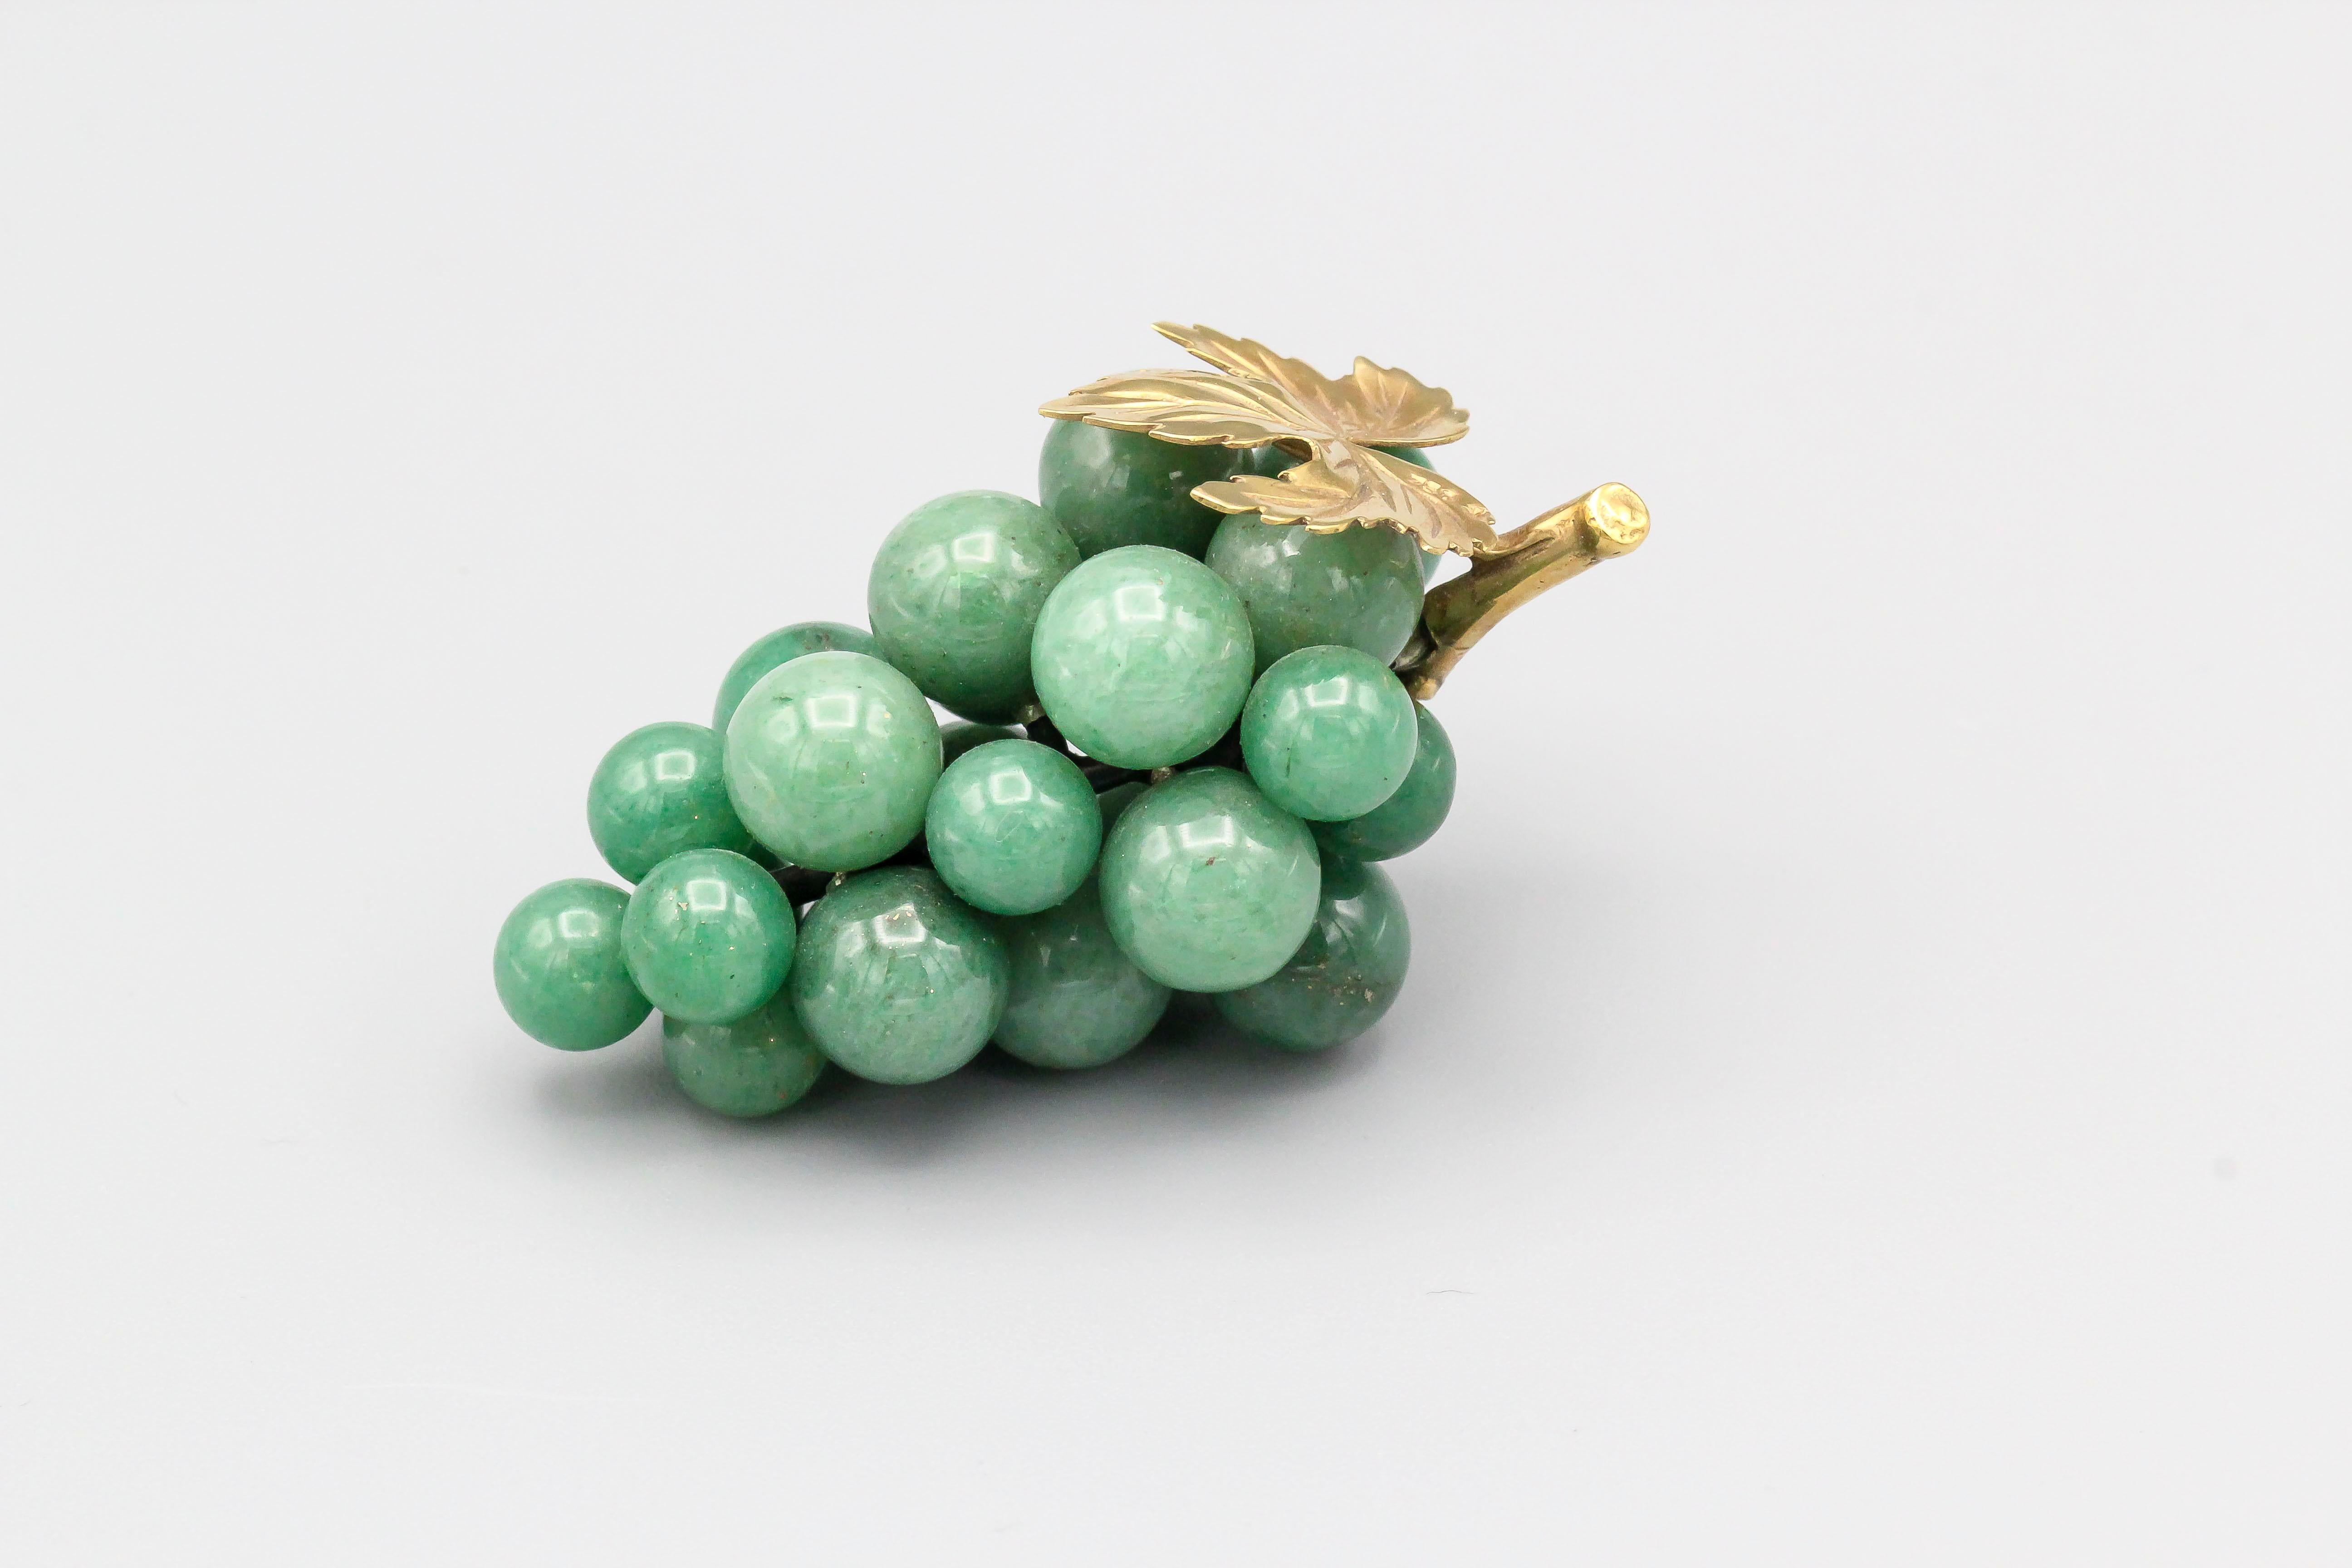 Fine aventurine and 18k yellow gold grapes paperweight by Vacheron Constantin. It resembles the actual fruit quite accurately, with gold as the top leaf and stem.

Hallmarks: Vacheron Constantin maker's mark, 750.